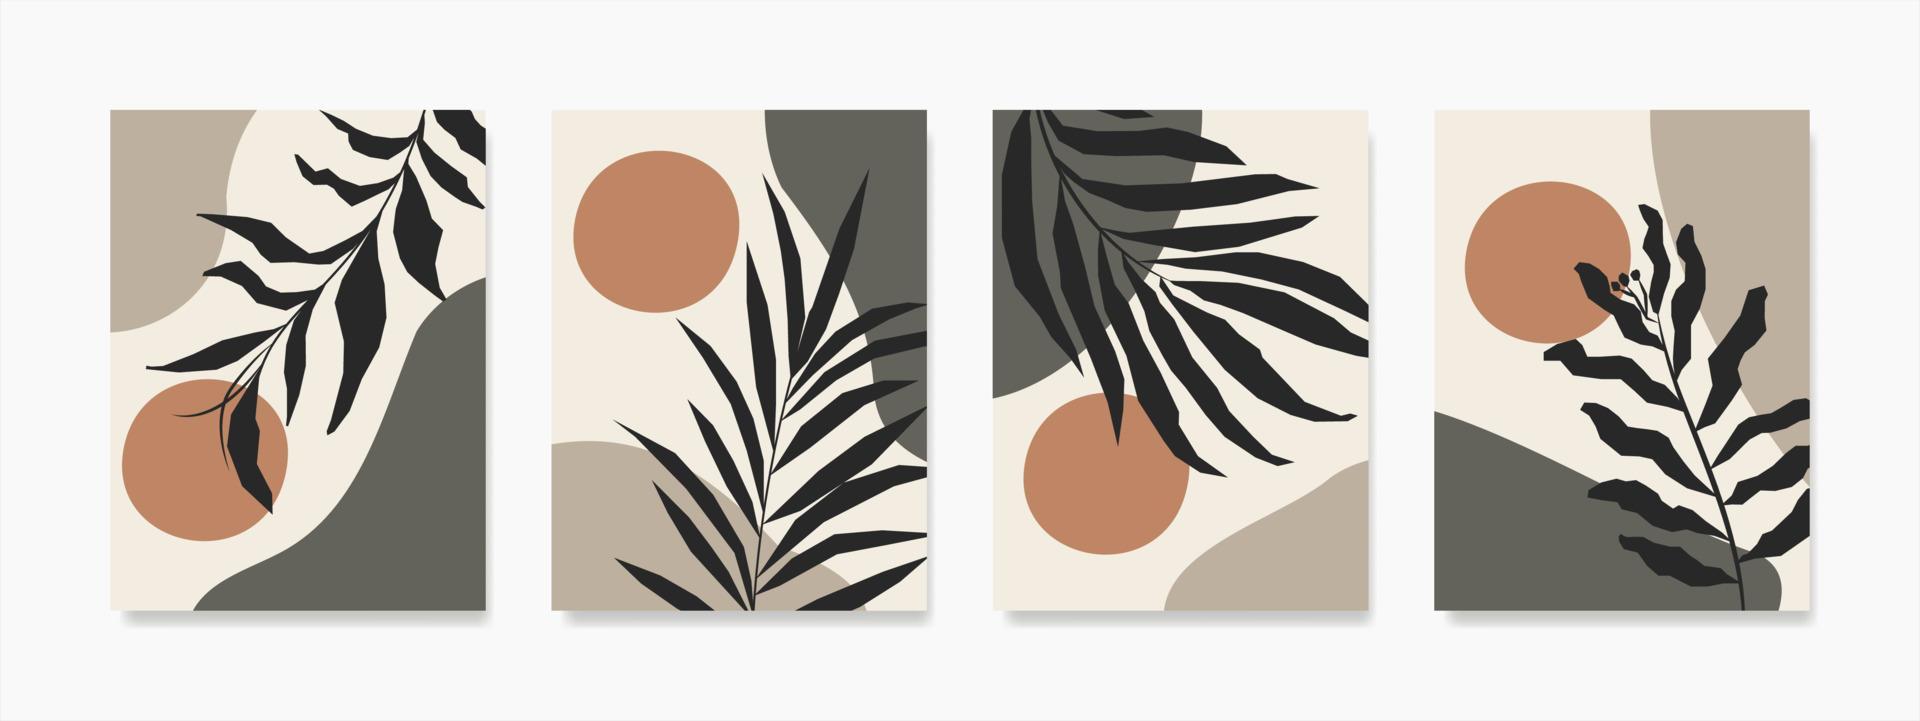 Abstrack shapes and Botanical wall art set. Earth tones landscapes wallpaper. Tropical wall decor for framed prints, canvas artwork, posters, home decor, covers, and wallpaper. vector